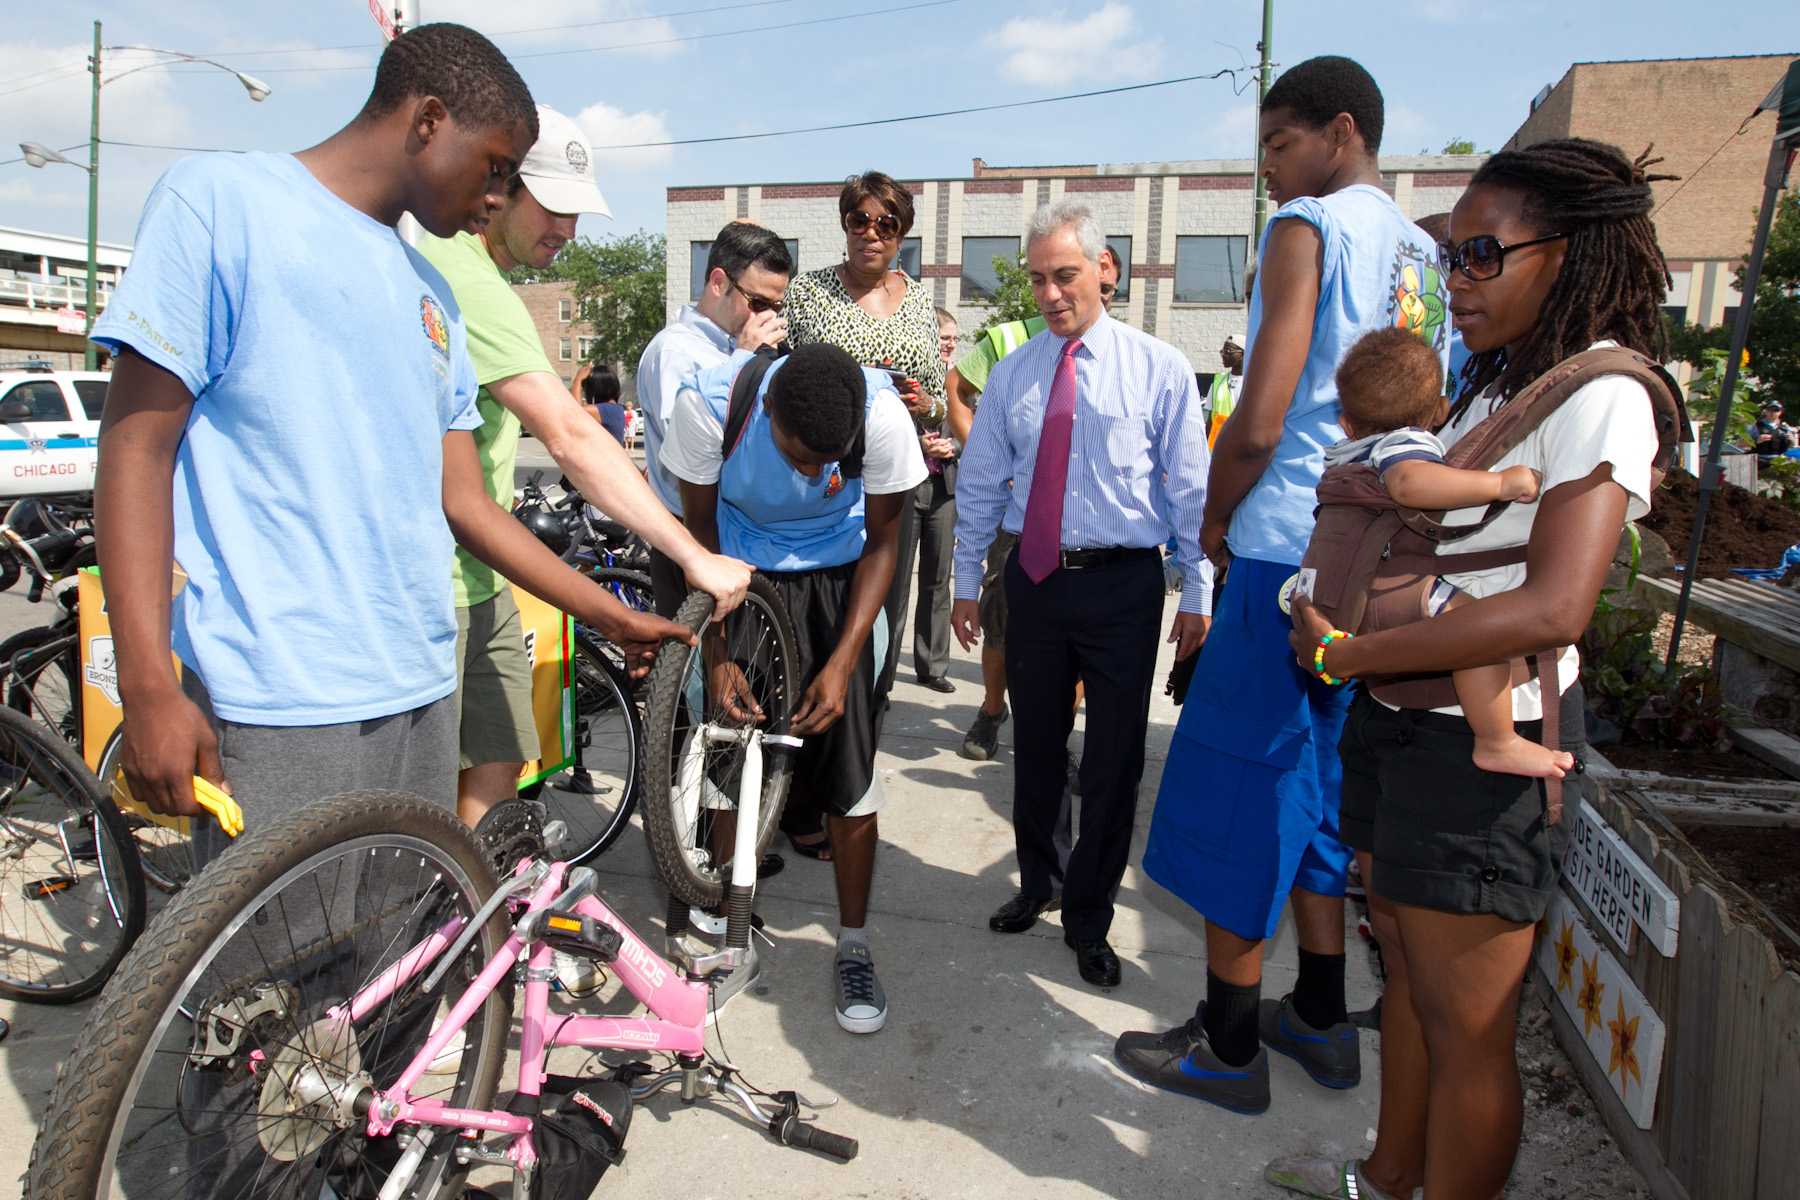 Mayor Emanuel visits with young people participating in Greencorps.